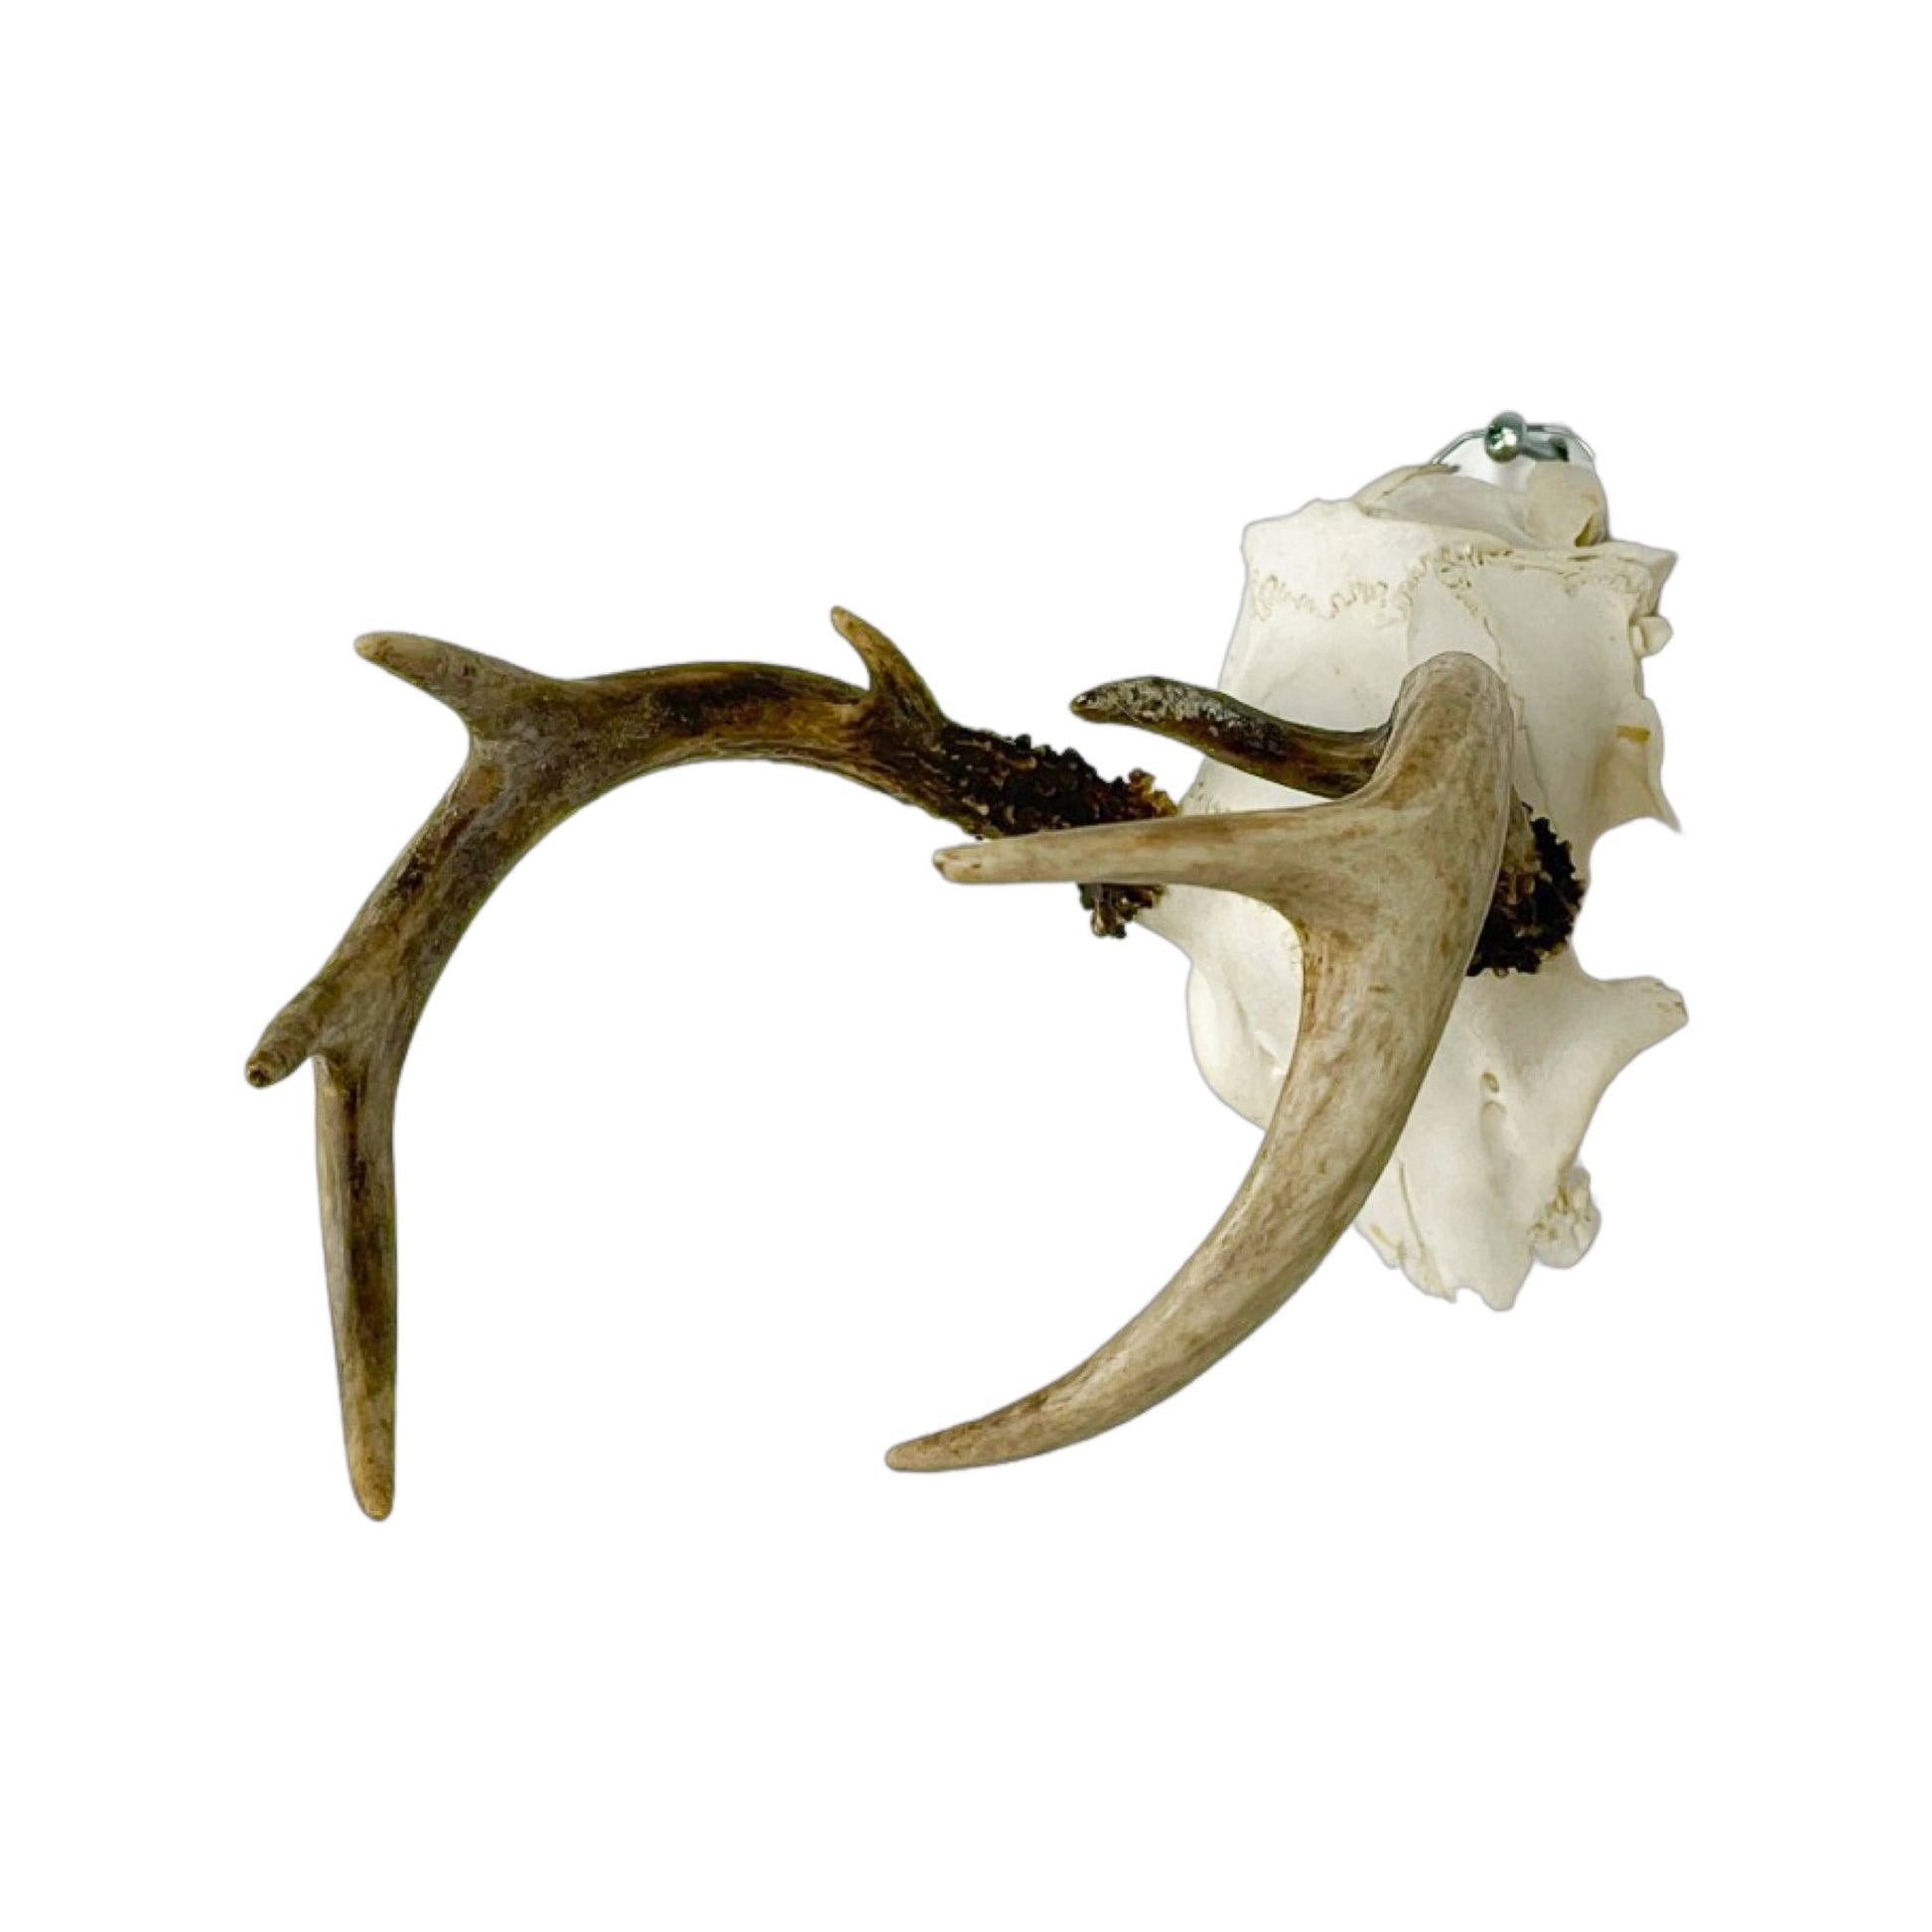 A Home Decor Taxidermy White-Tailed Deer European Skull of Grade Inferior